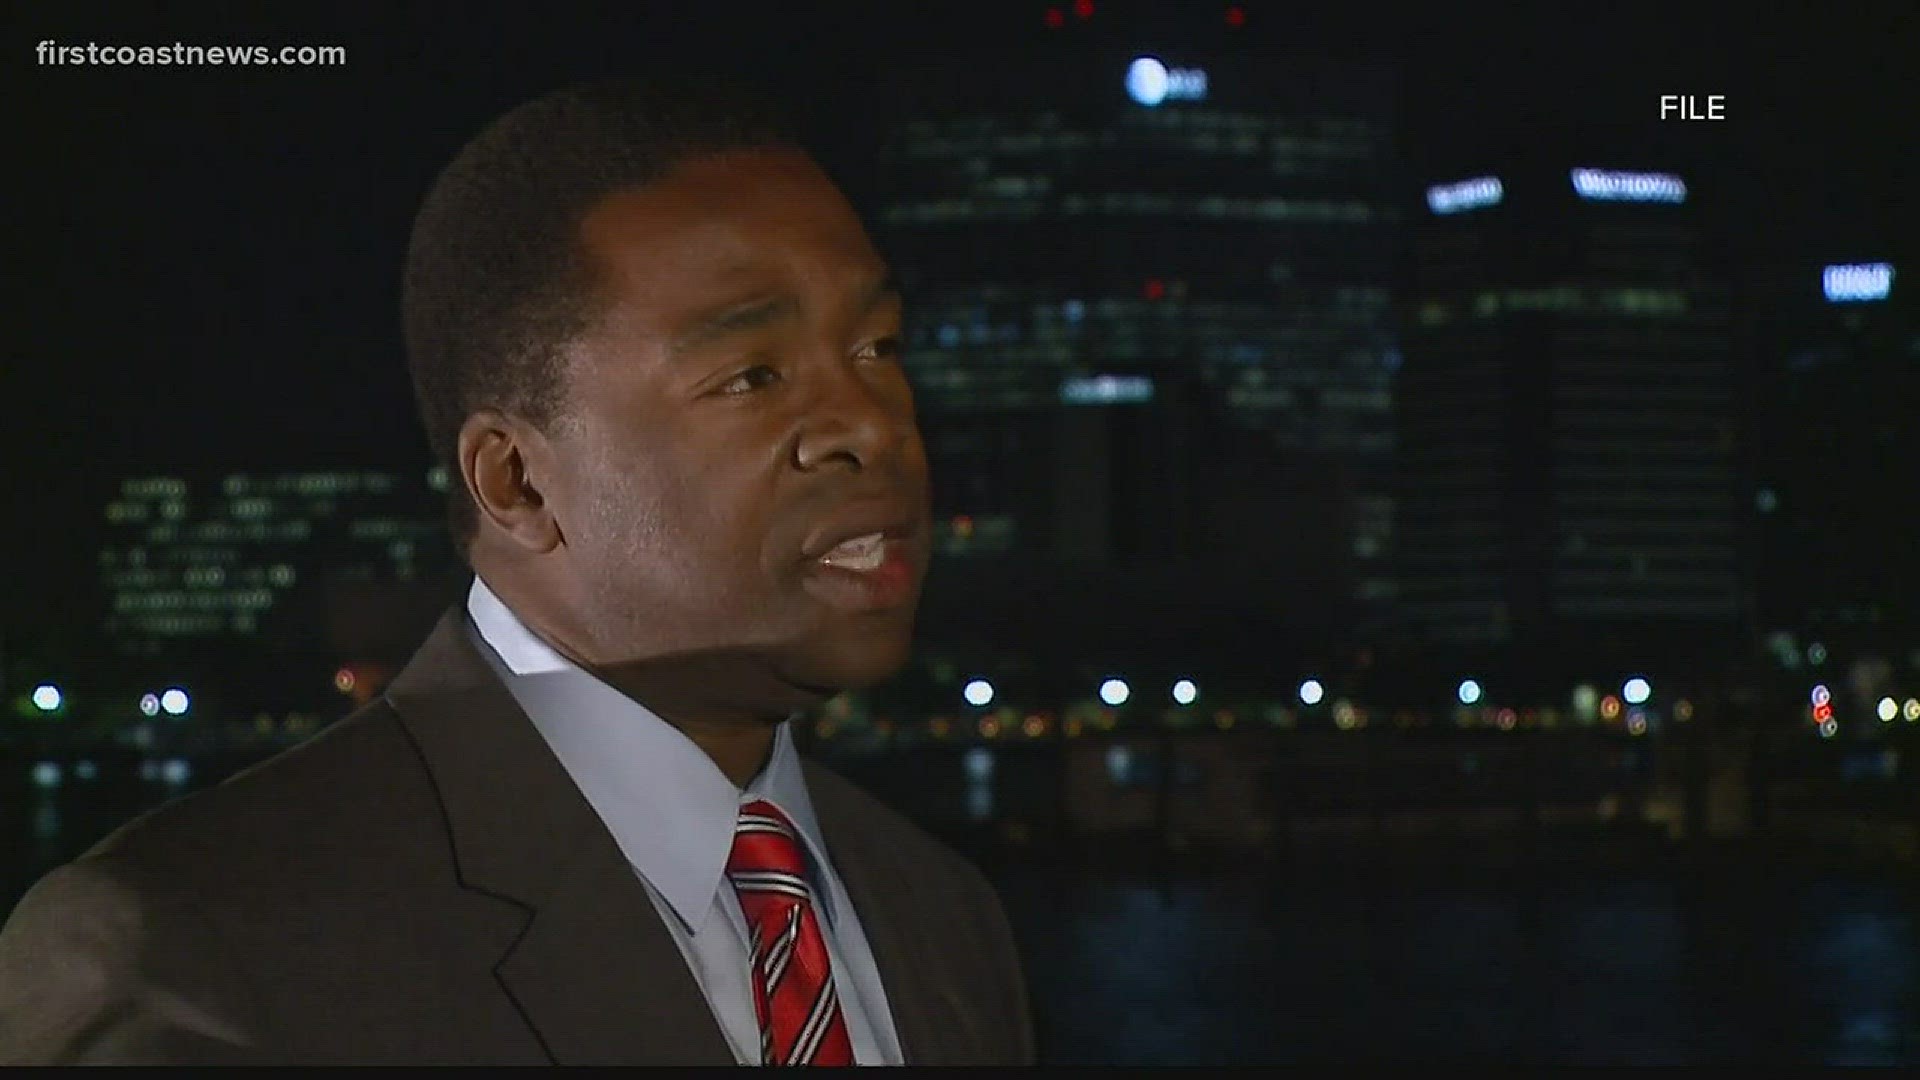 Former Mayor Alvin Brown of Jacksonville formally announced Tuesday his candidacy for Florida's 5th Congressional District.